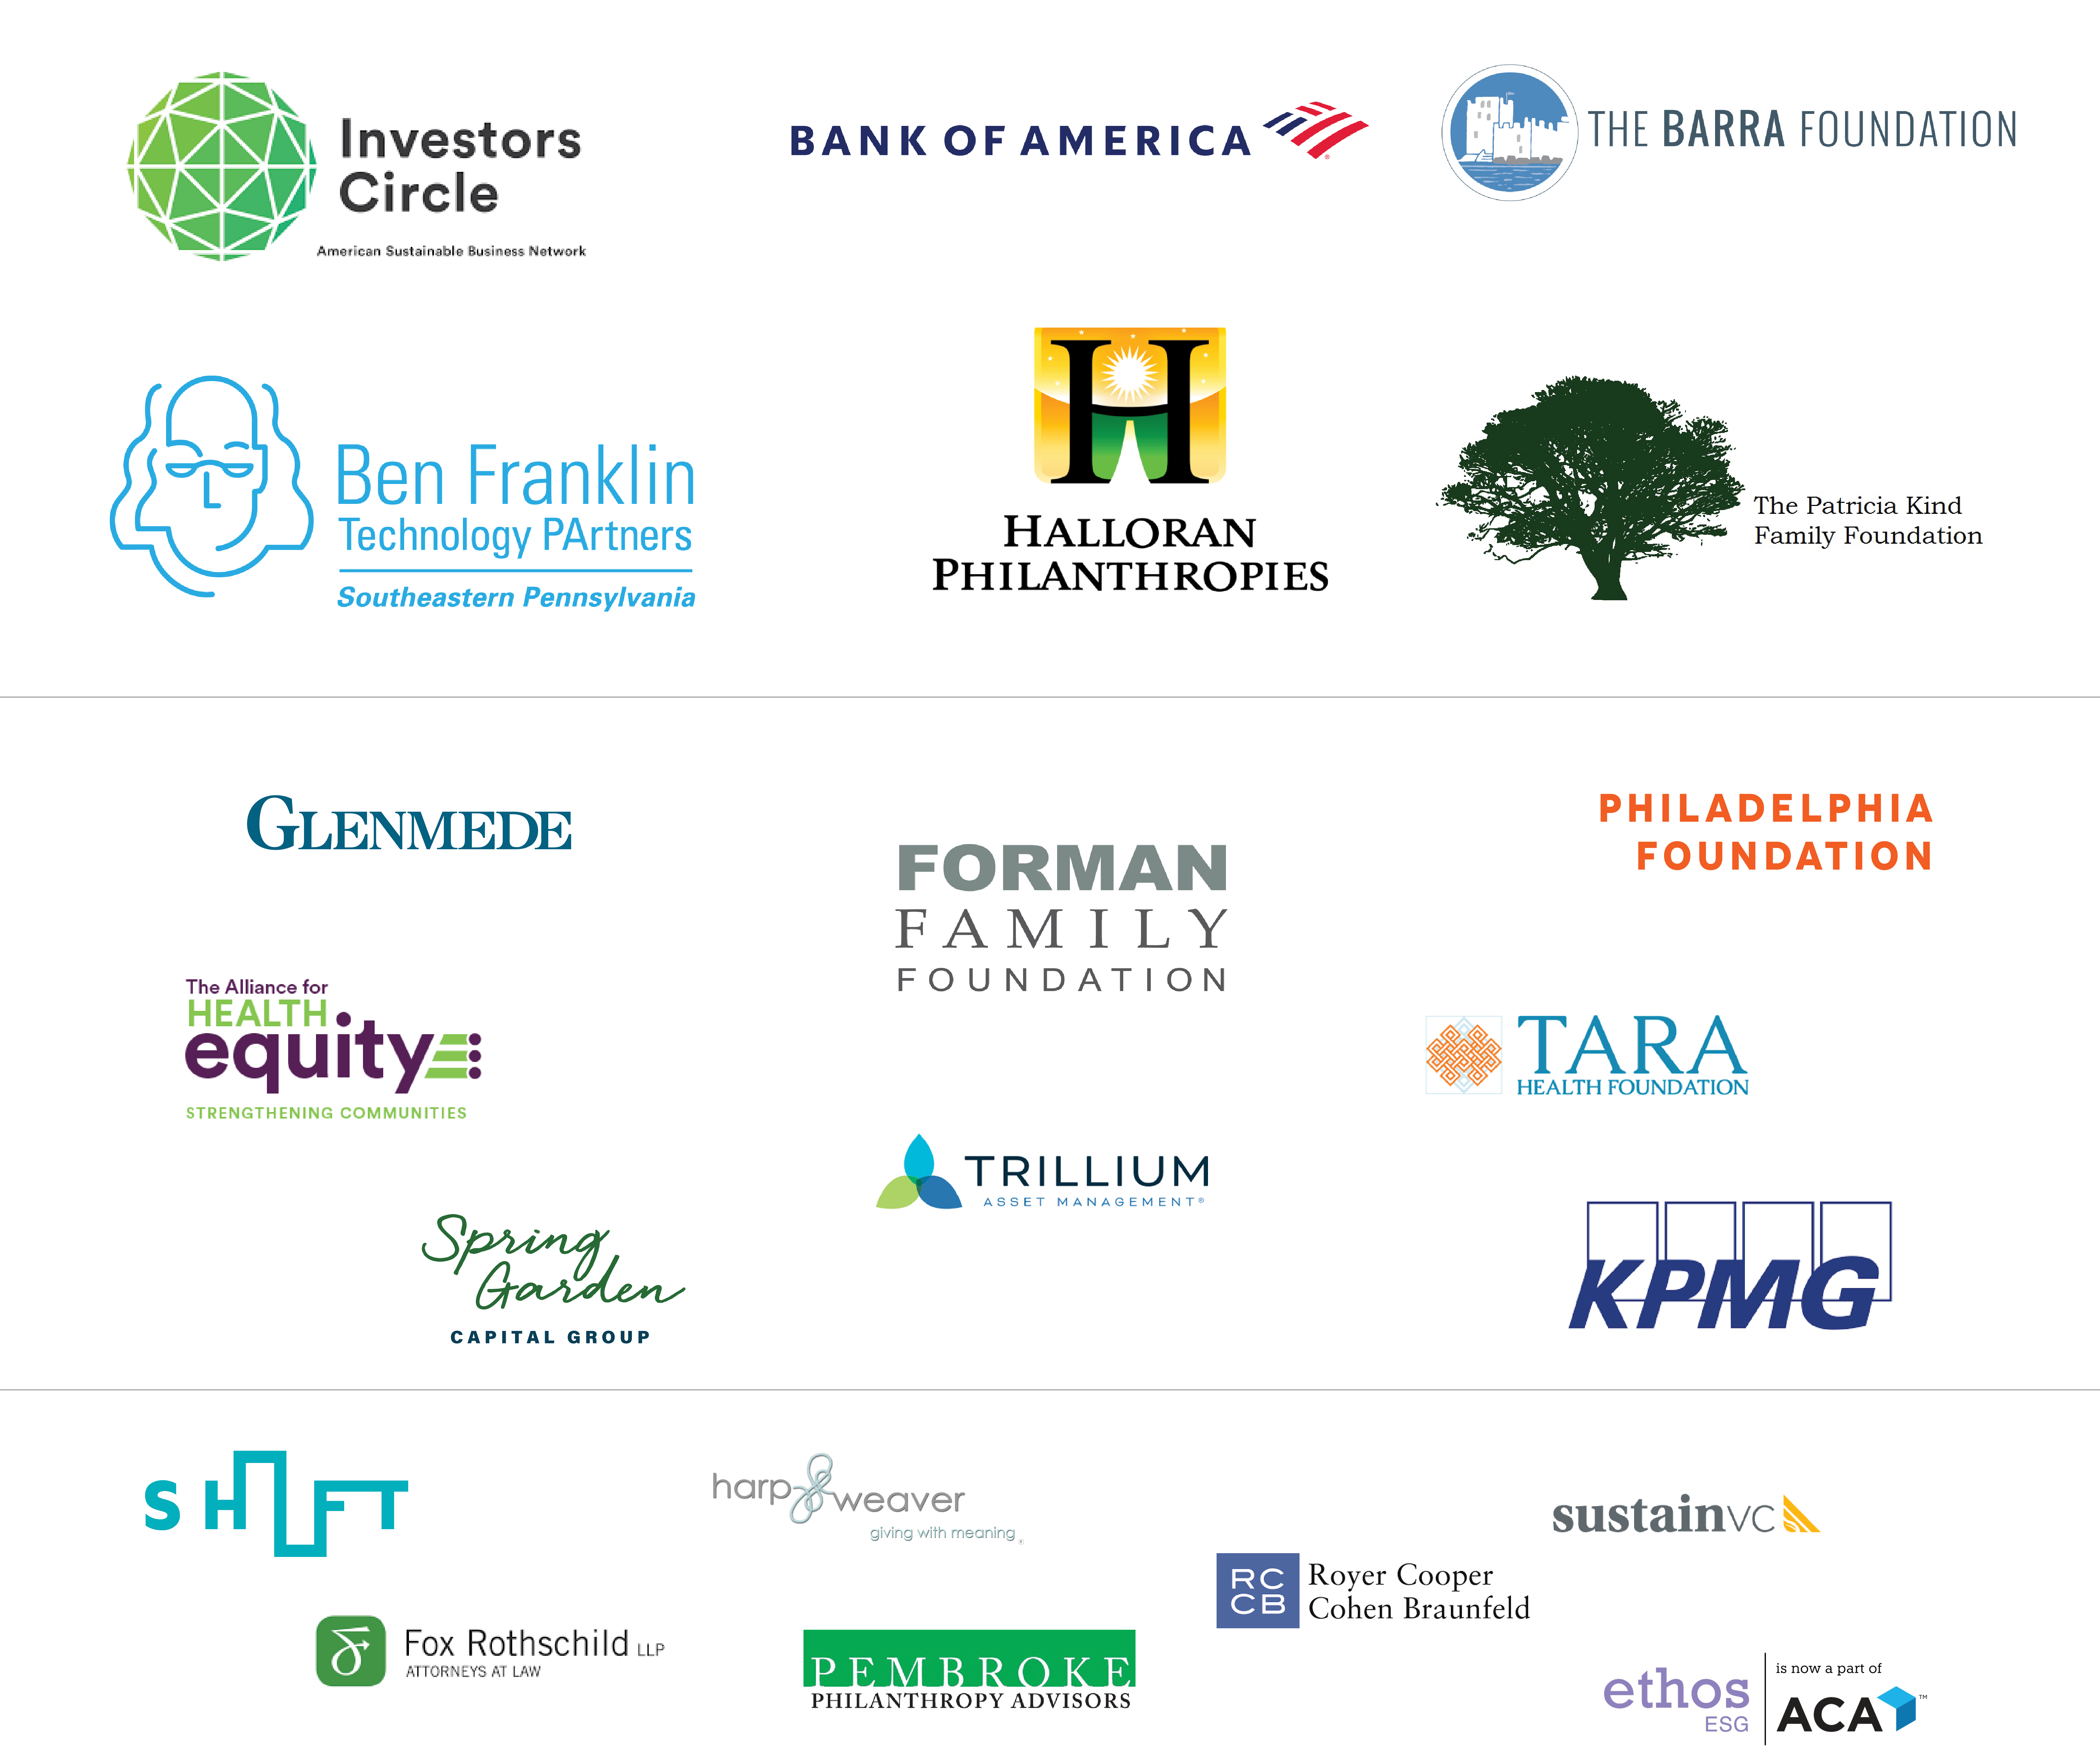 Many thanks to our annual partners